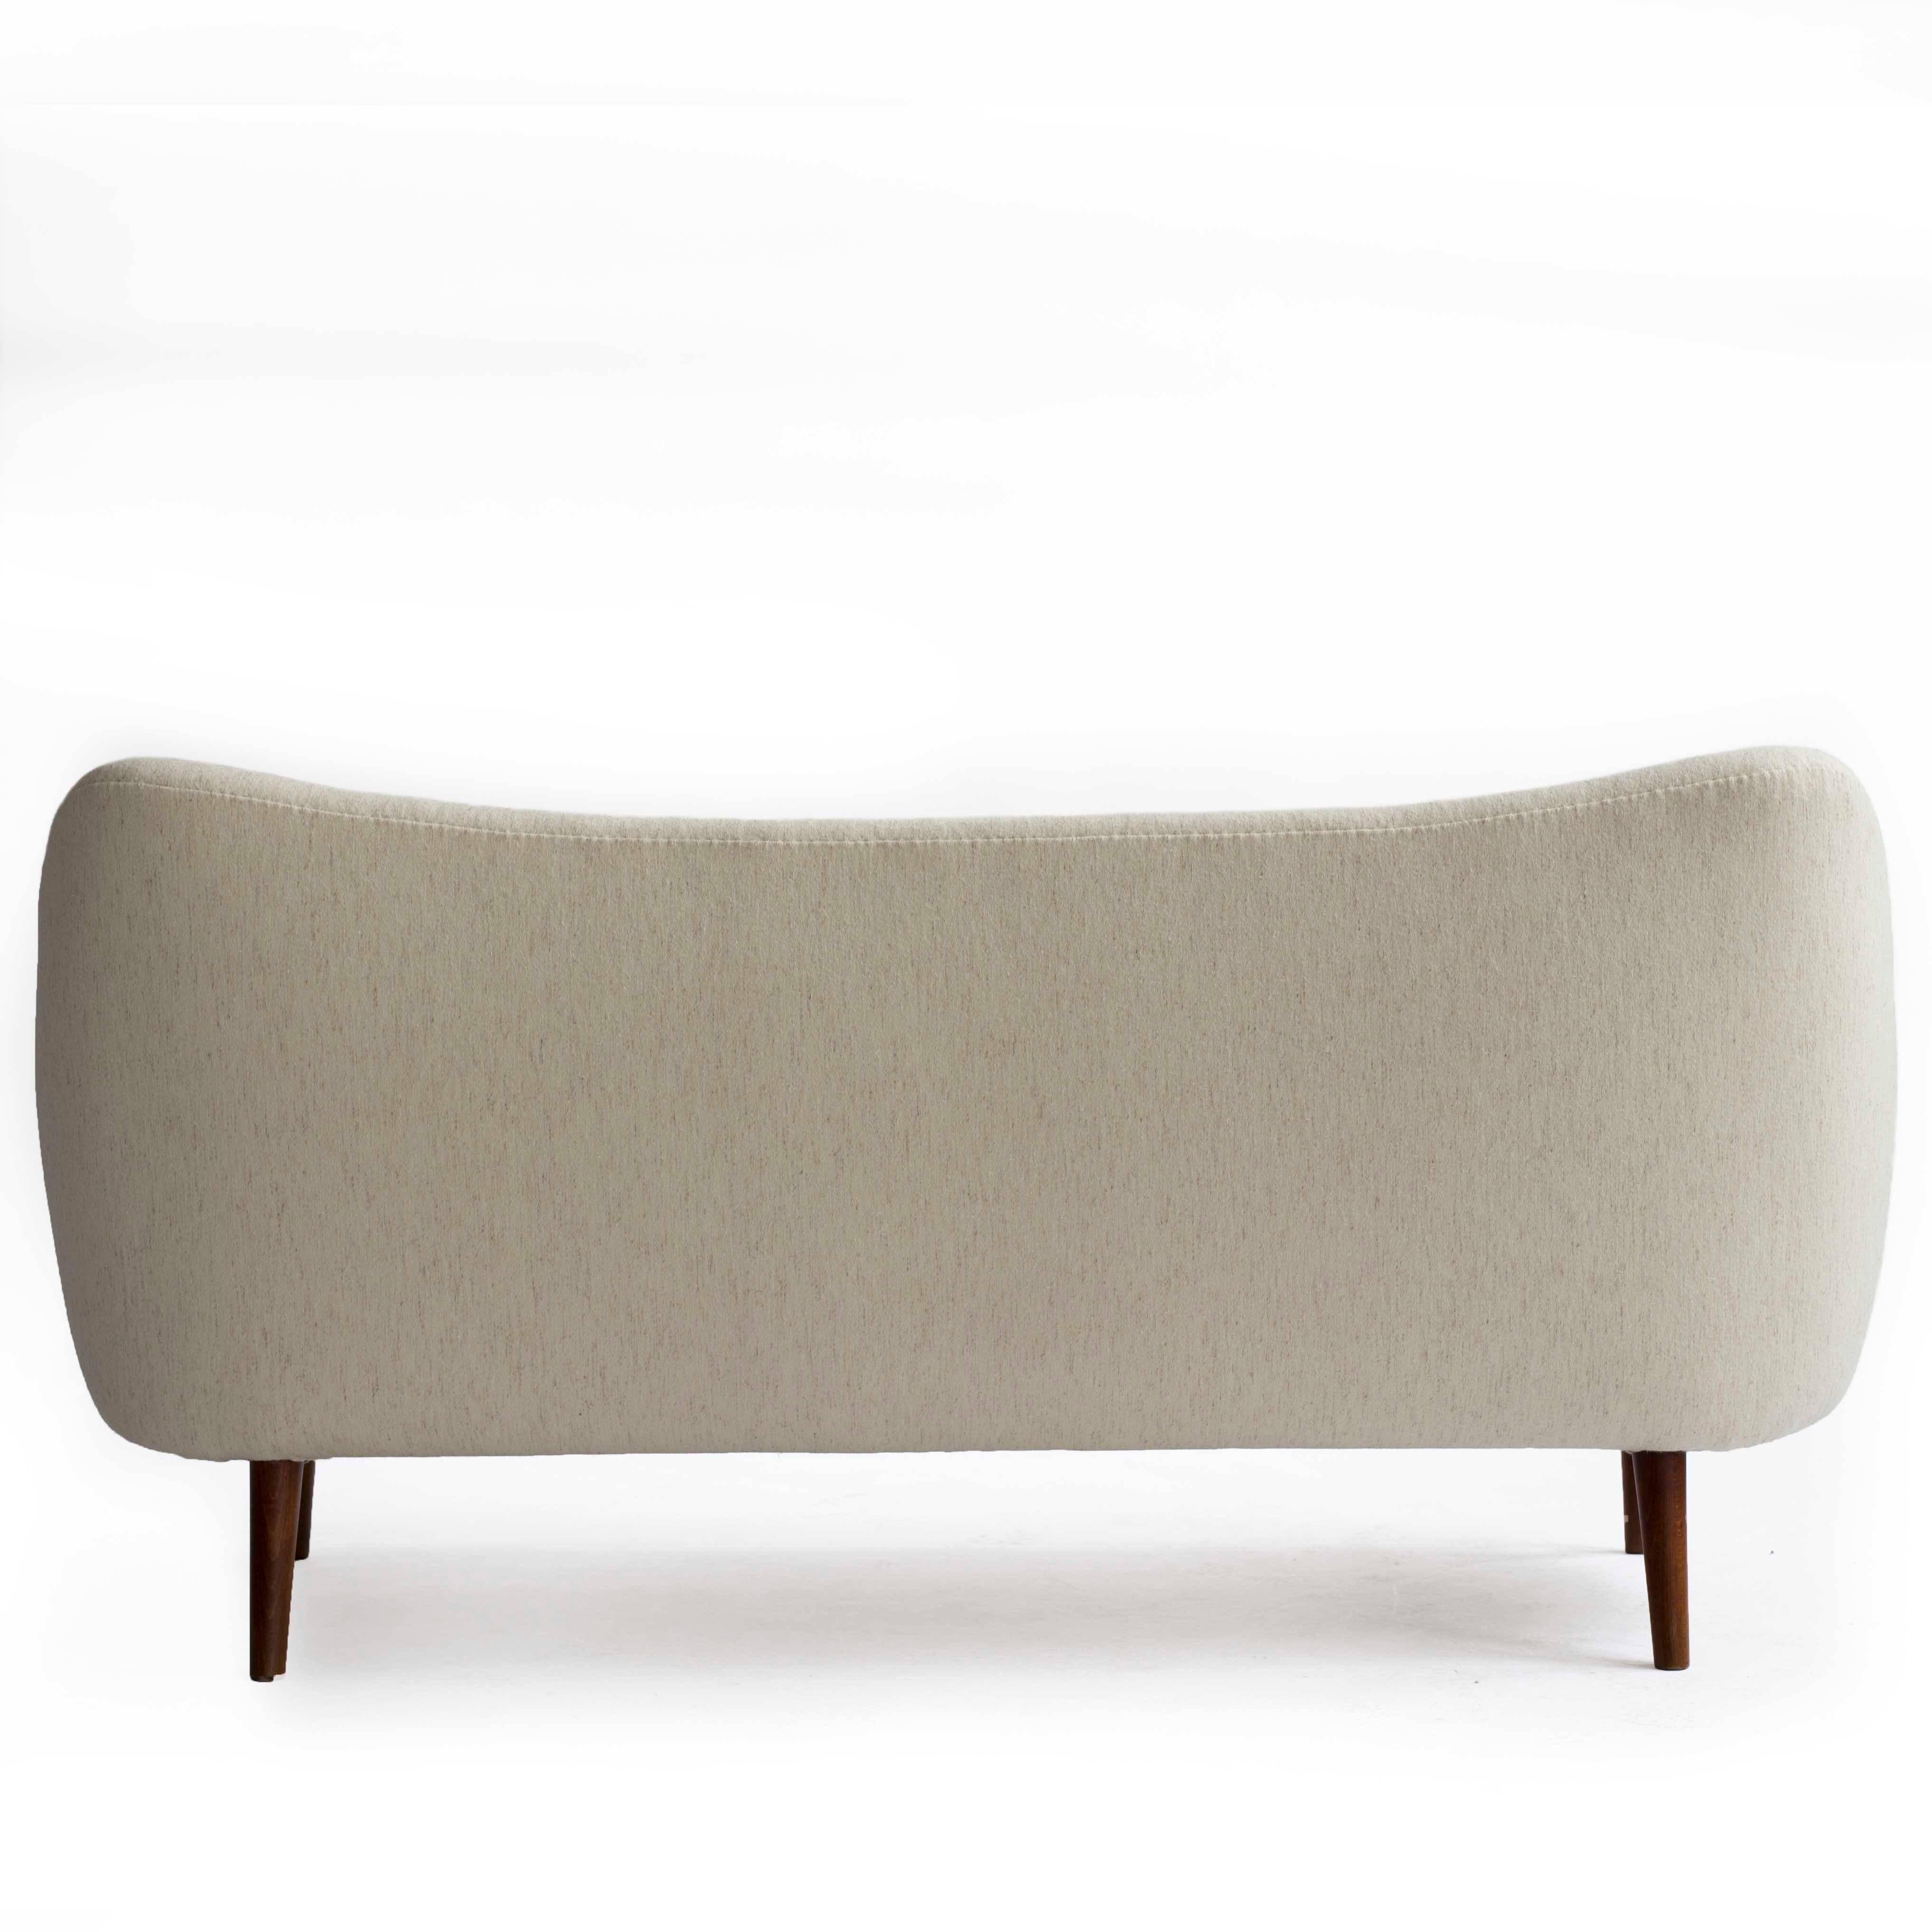 Finn Juhl 2.5 - 3 person sofa upholstered with off white wool, tapering legs of stained beech. 

Designed by Finn Juhl 1948 and manufactured by Bovirke Denmark, model BO64.
         